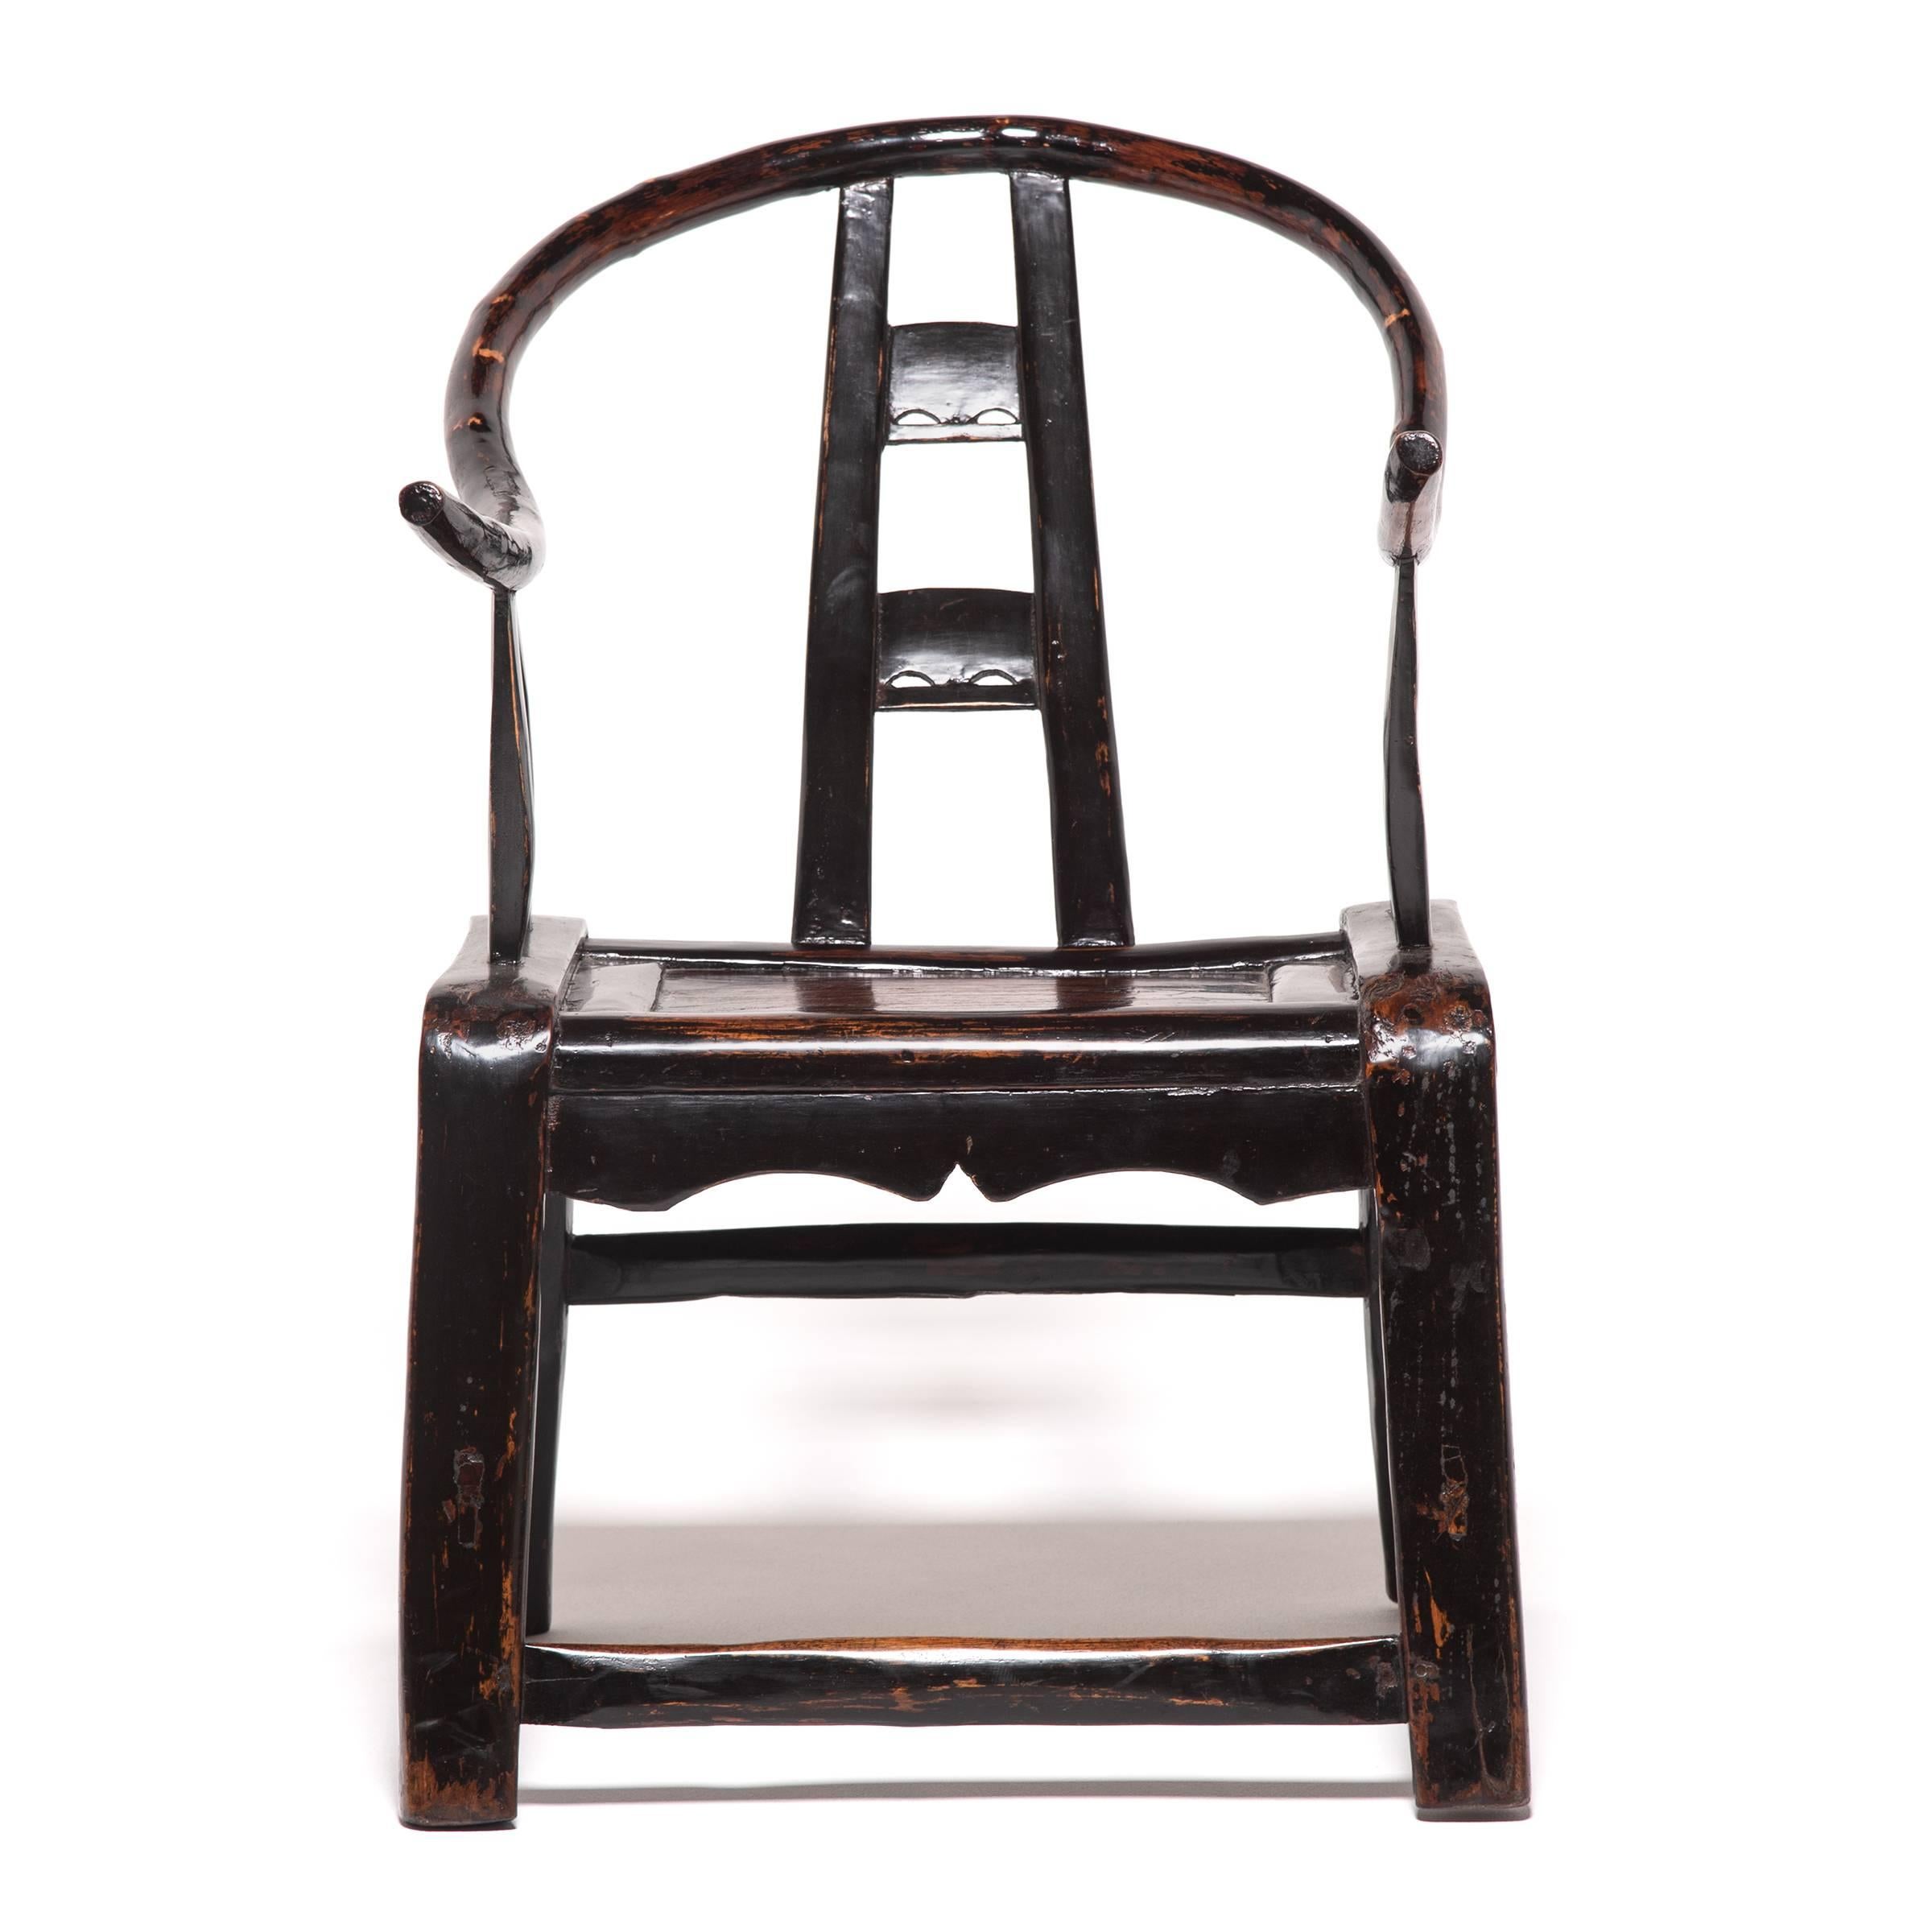 This pair of elmwood chairs was made over a 150 years ago in China’s Shanxi province. Touched by the personal aesthetic sense of the artisan who crafted them, the chairs' simple, elegant form nonetheless hearkens back to classical Chinese furniture